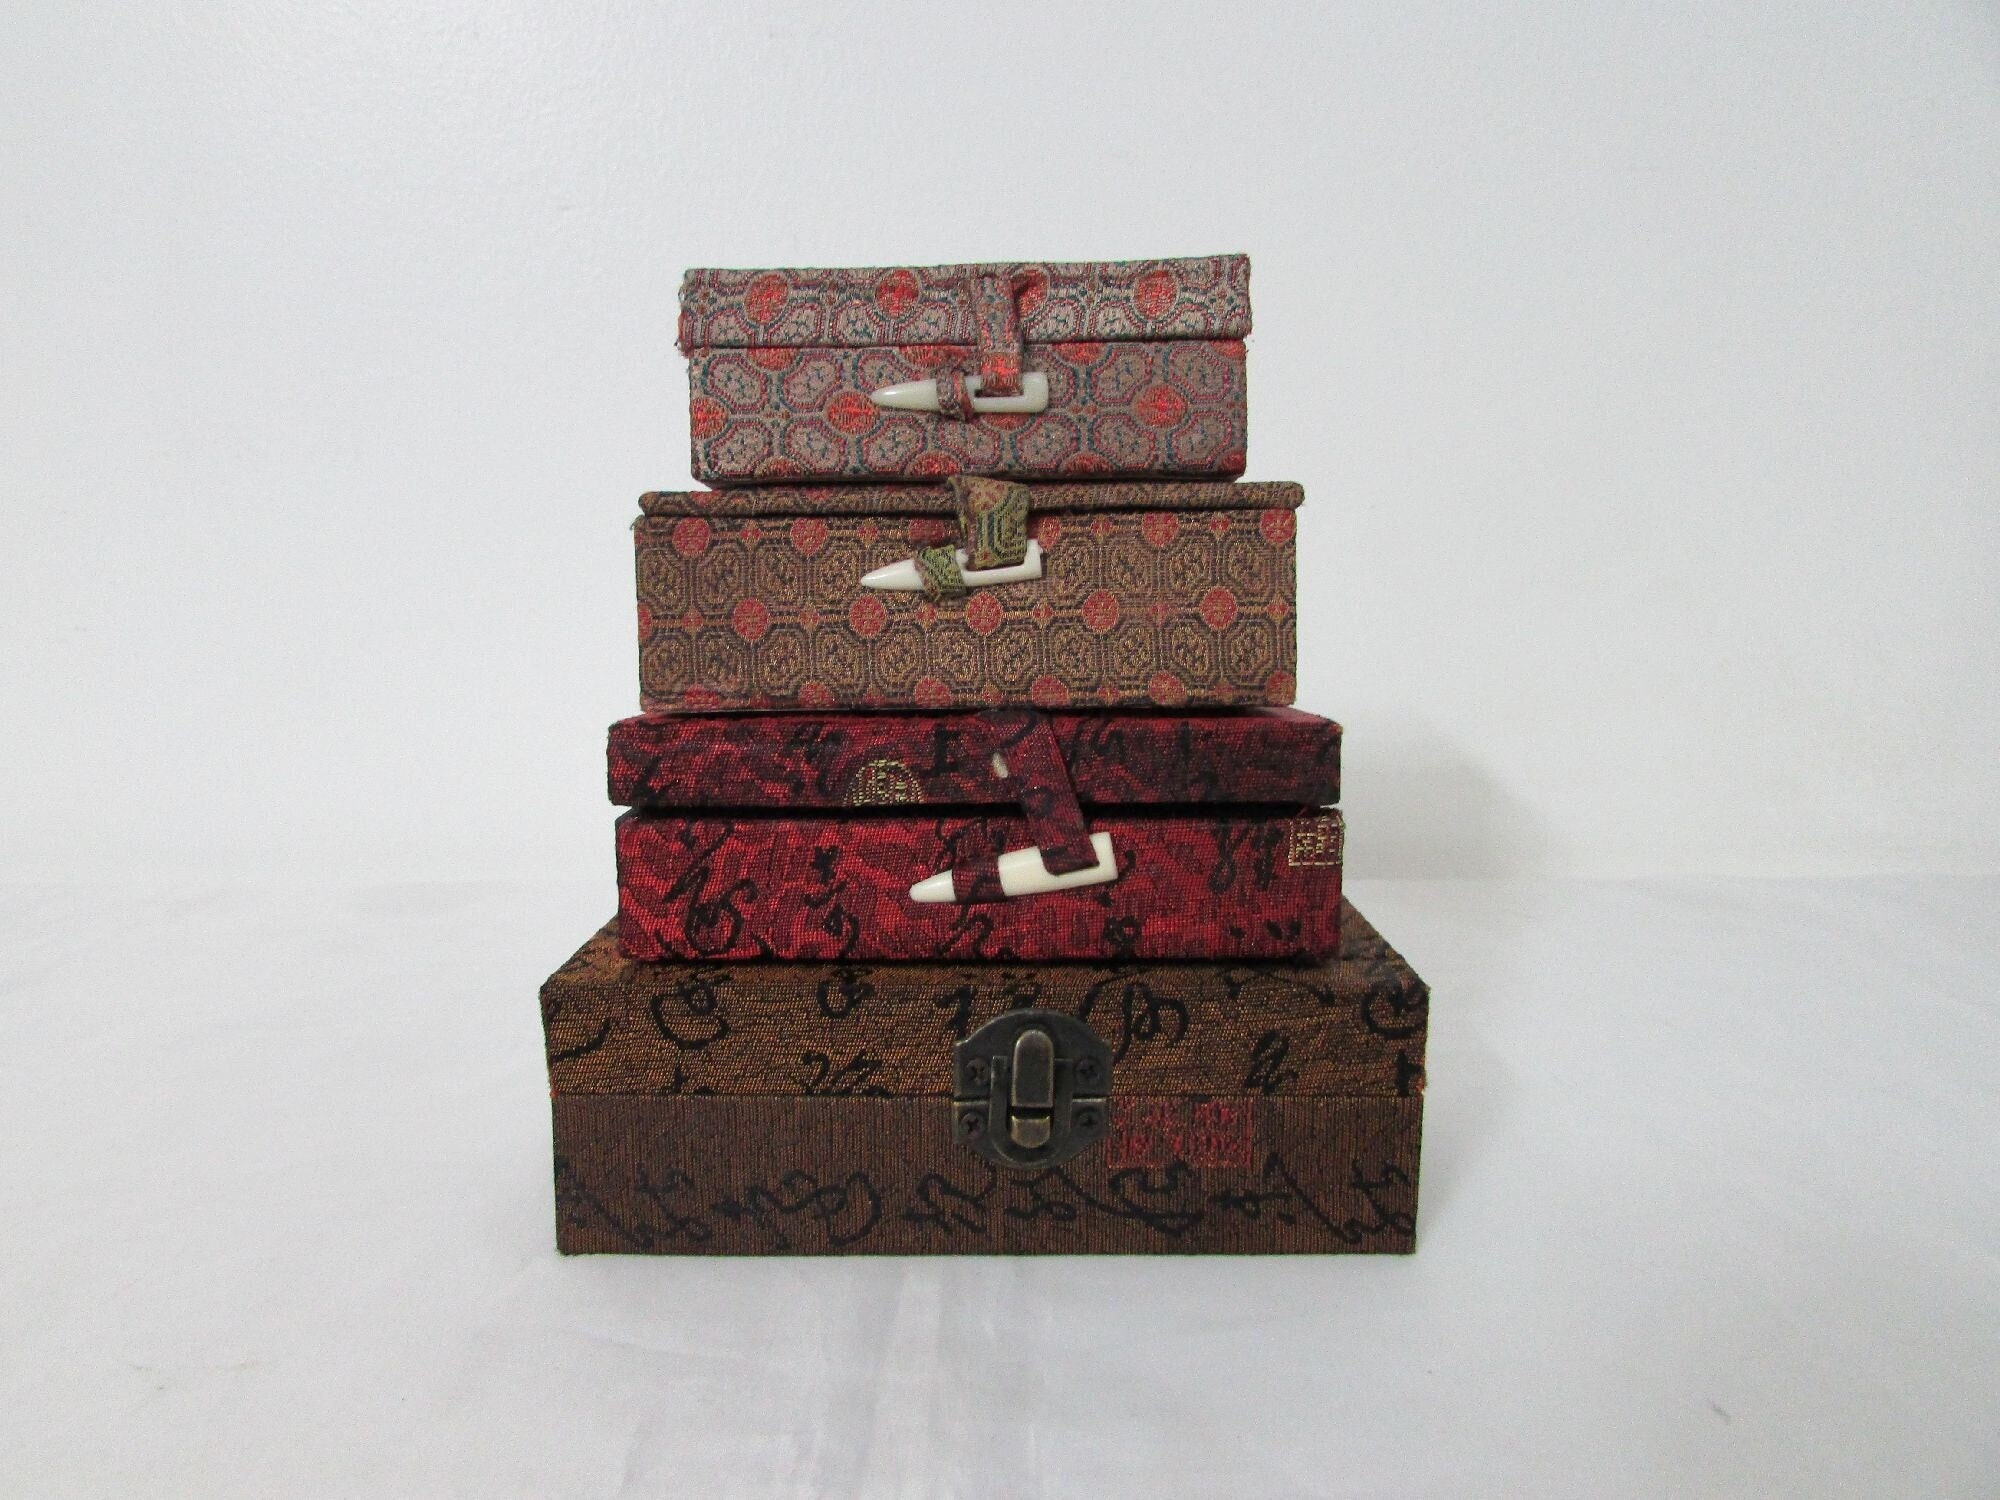 Louis Vuitton Gift Jewelry Boxes & Organizers